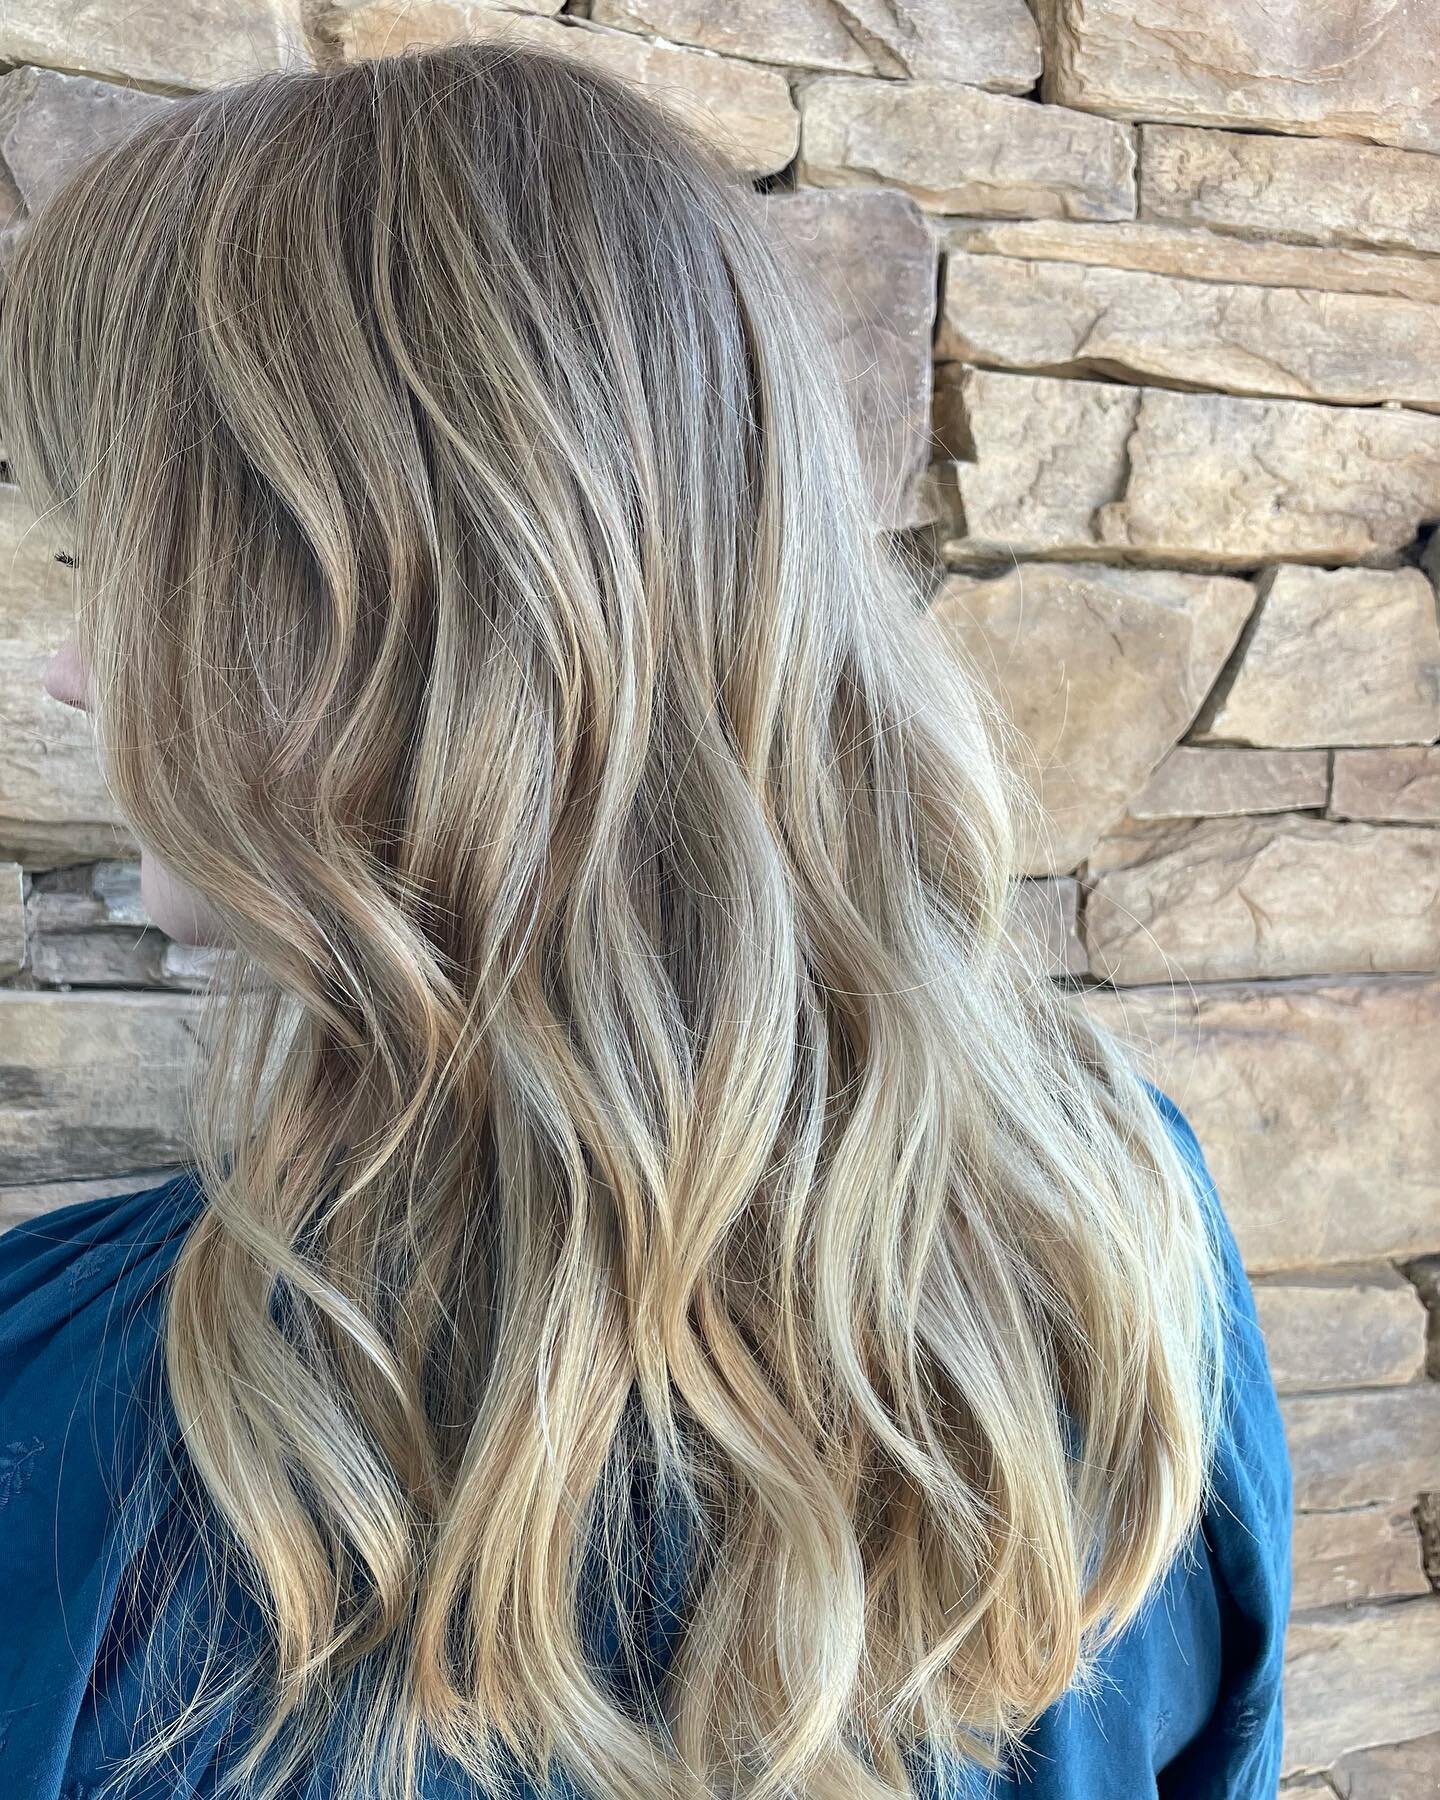 Naturally elevated blonde